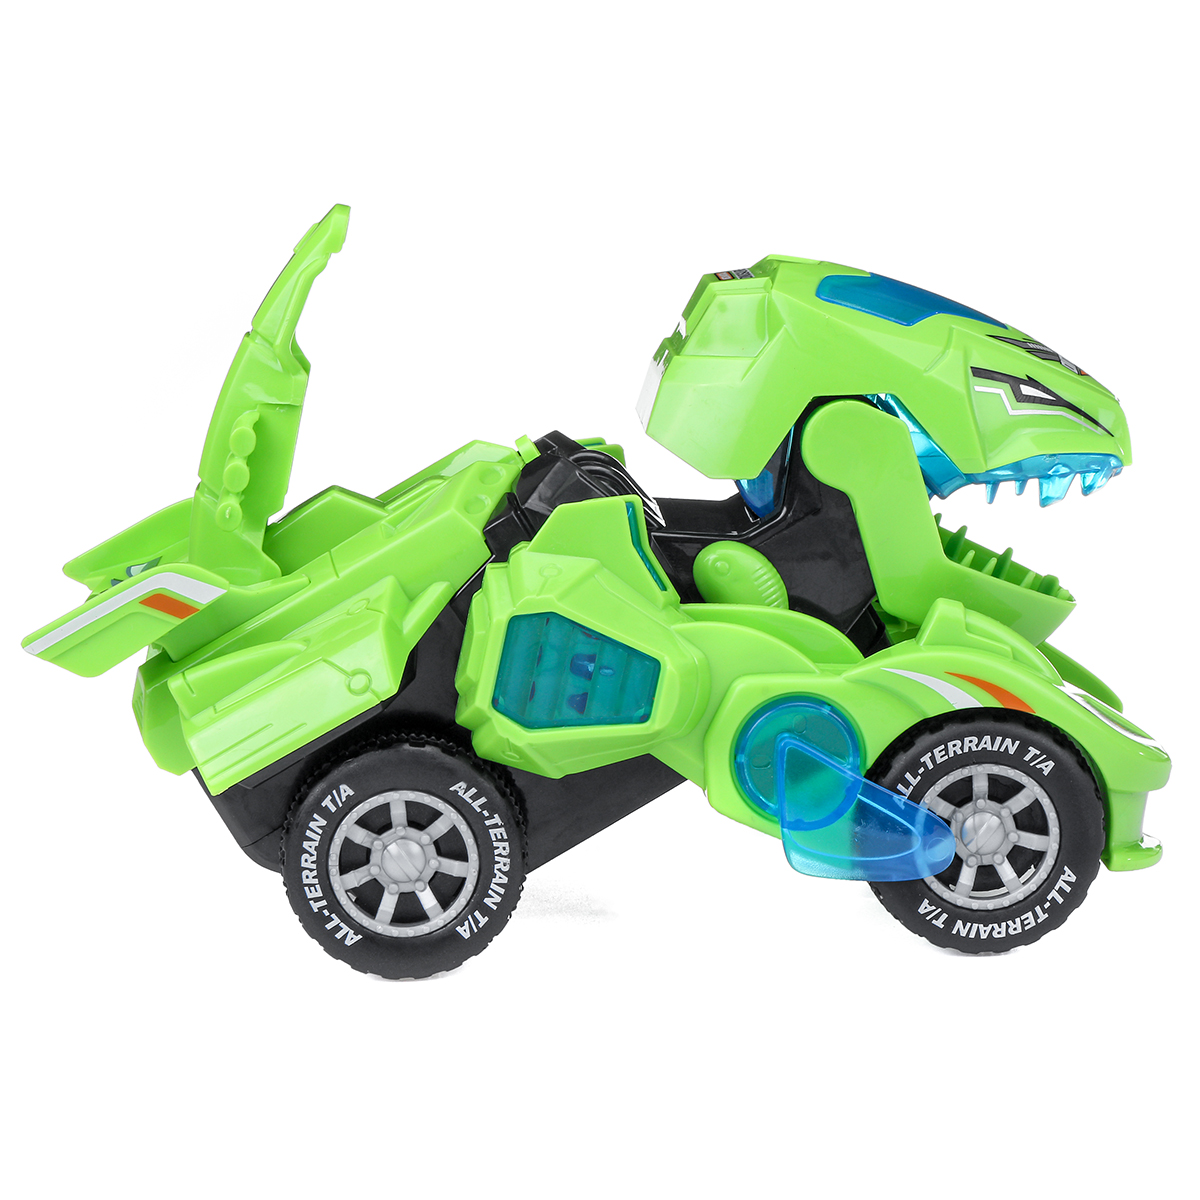 Creative-Dinosaur-Deformation-Toy-Car-Puzzle-Dinosaur-Electric-Toy-Car-Light-and-Music-Electric-Defo-1757309-11